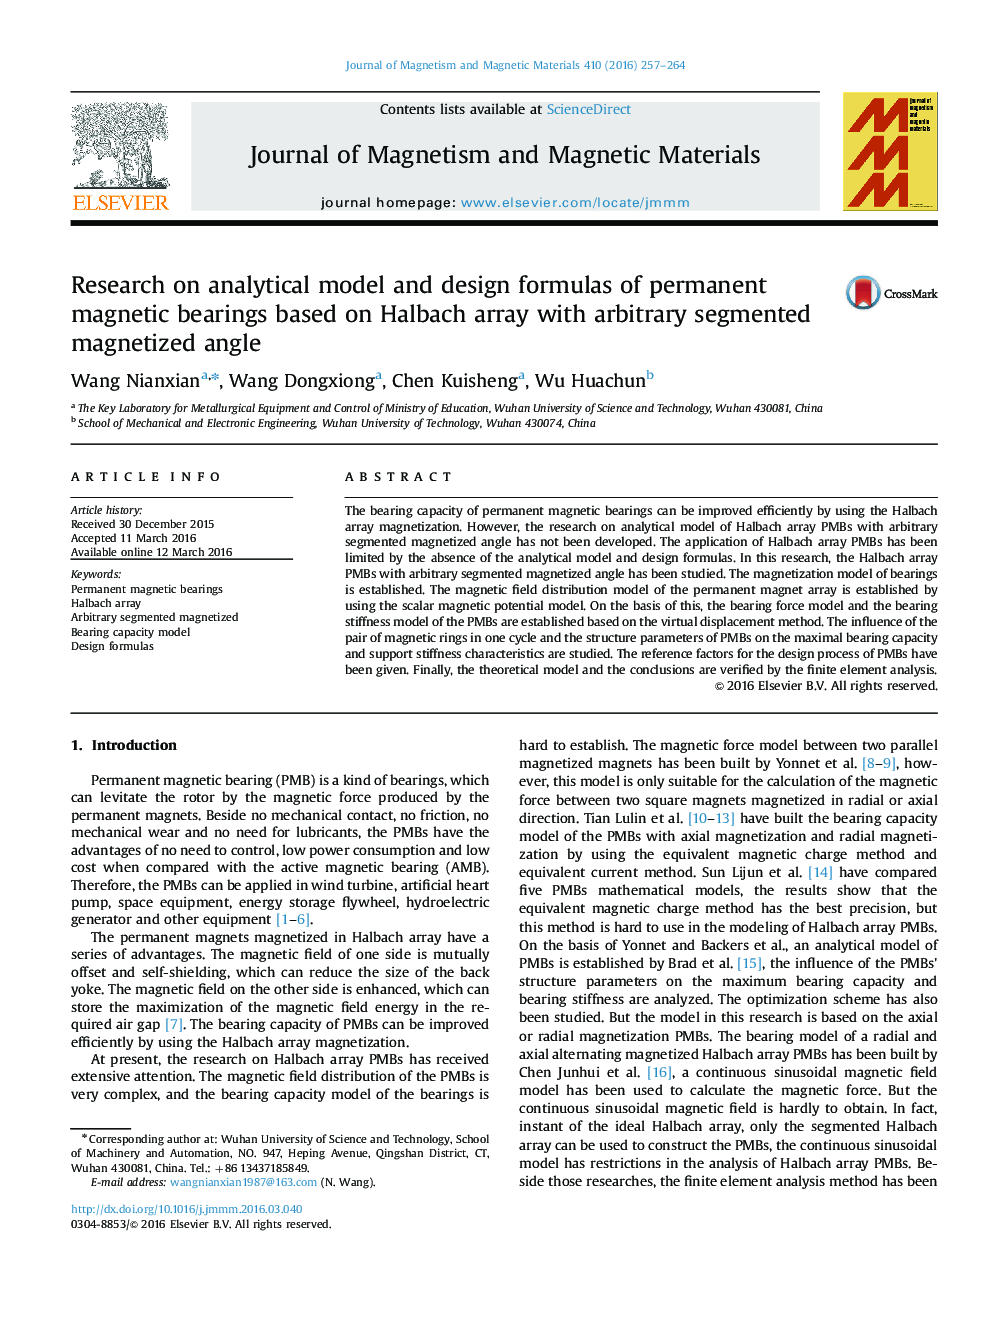 Research on analytical model and design formulas of permanent magnetic bearings based on Halbach array with arbitrary segmented magnetized angle